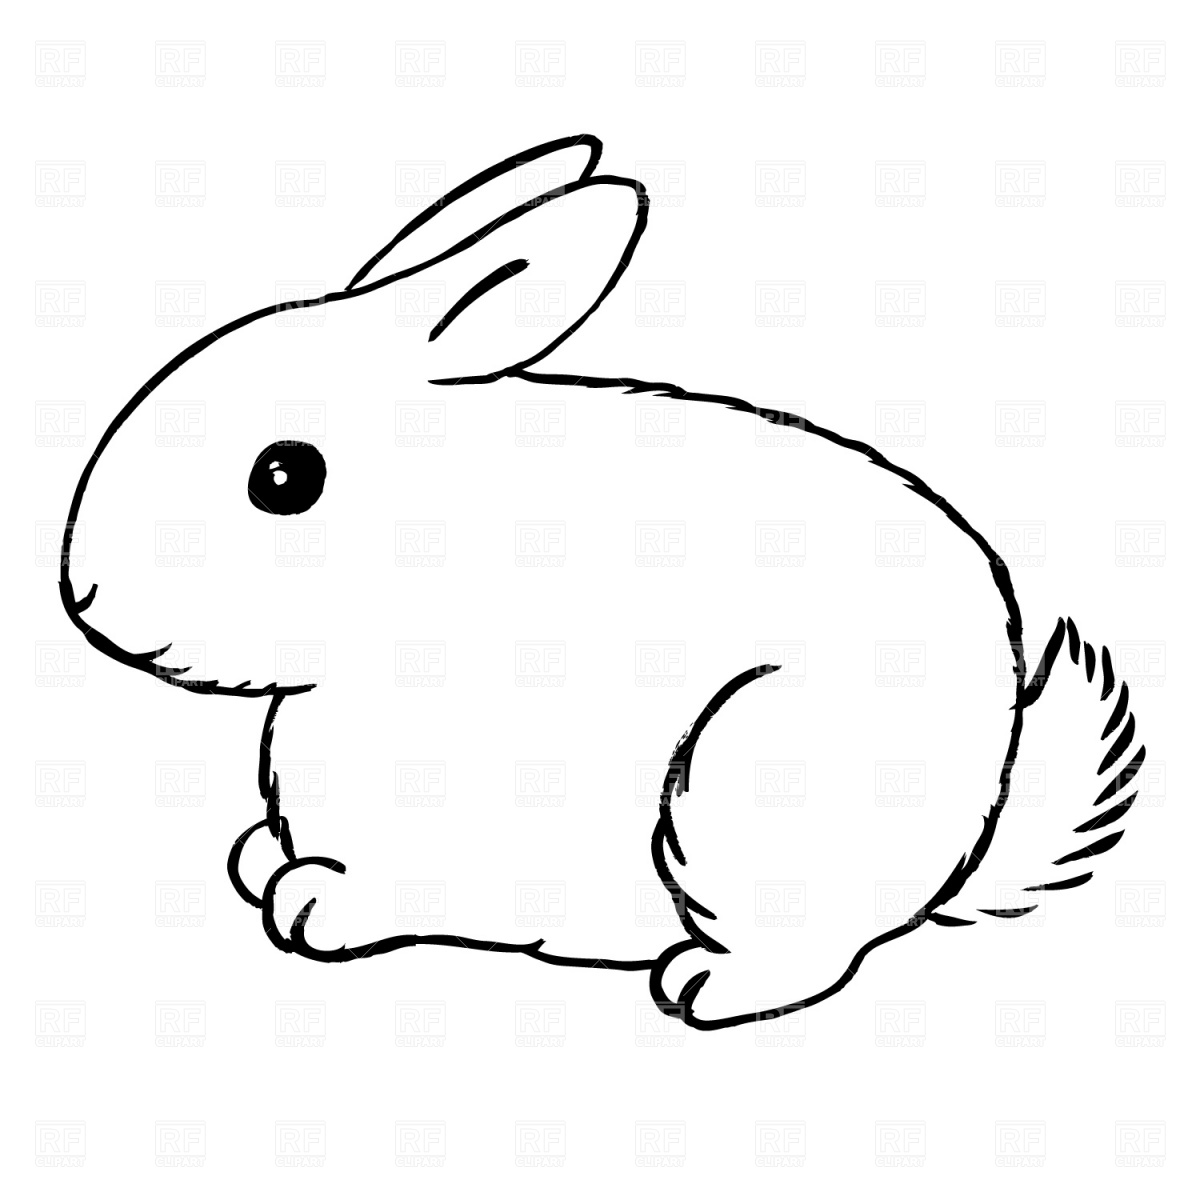 Rabbit bunny clipart black and white free clipart images 5